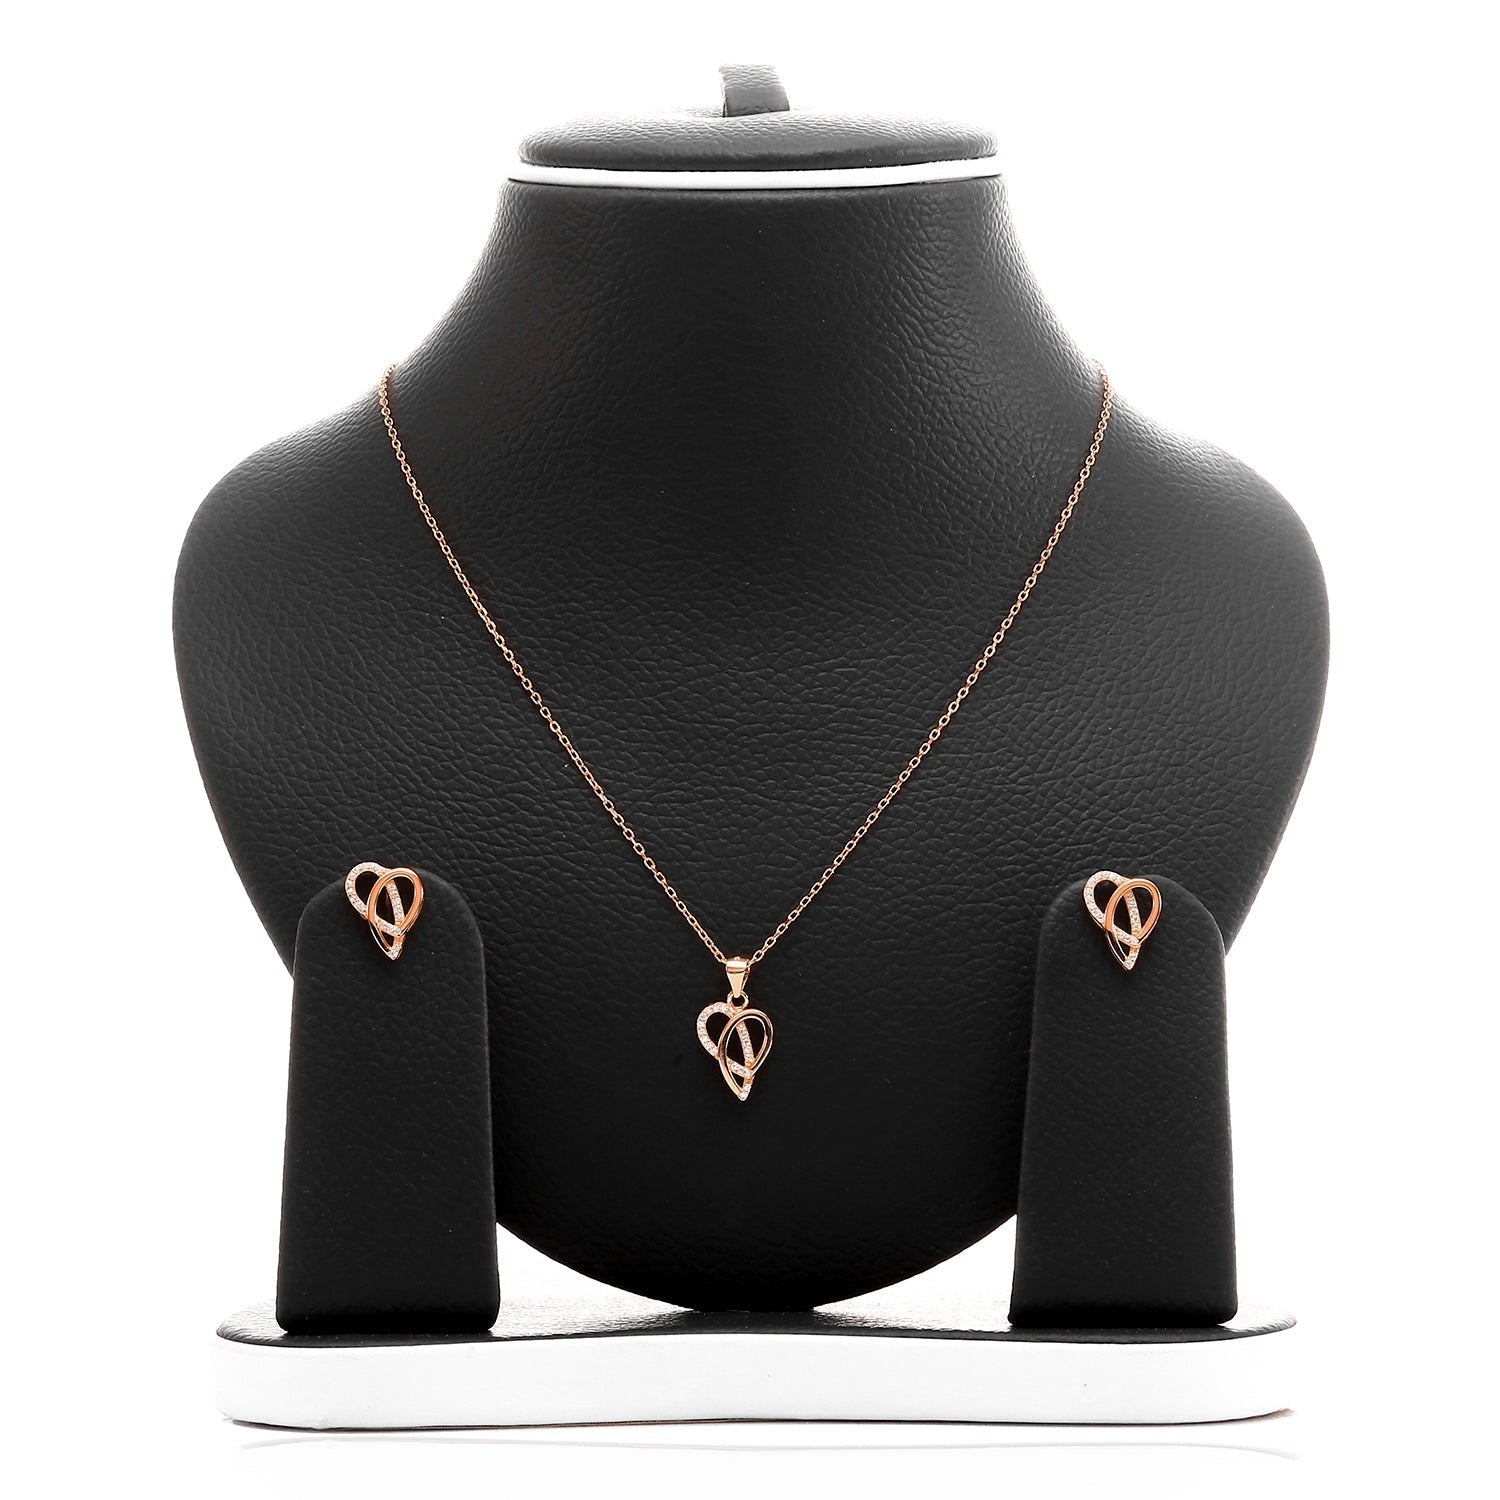 Ribbons of Love Pendant Necklace and Earrings Set - ARJW1007RG ARCADIO